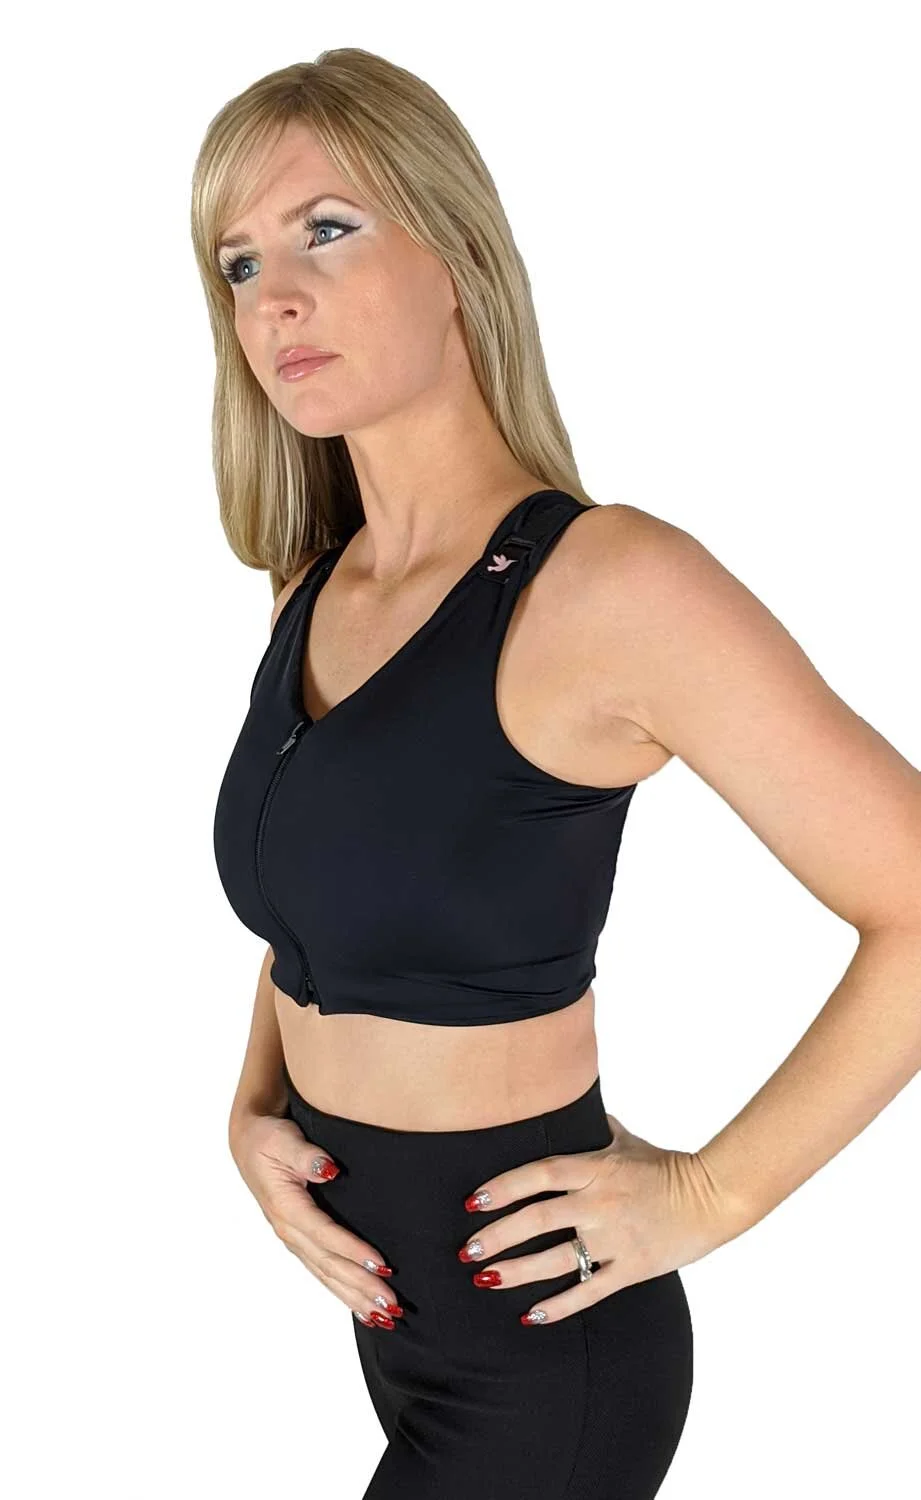 Comfortable Post-Surgery Bra for Women - Front Closure Sports Bra for  Breast Augmentation, Mastectomy, and Post-Op Recovery